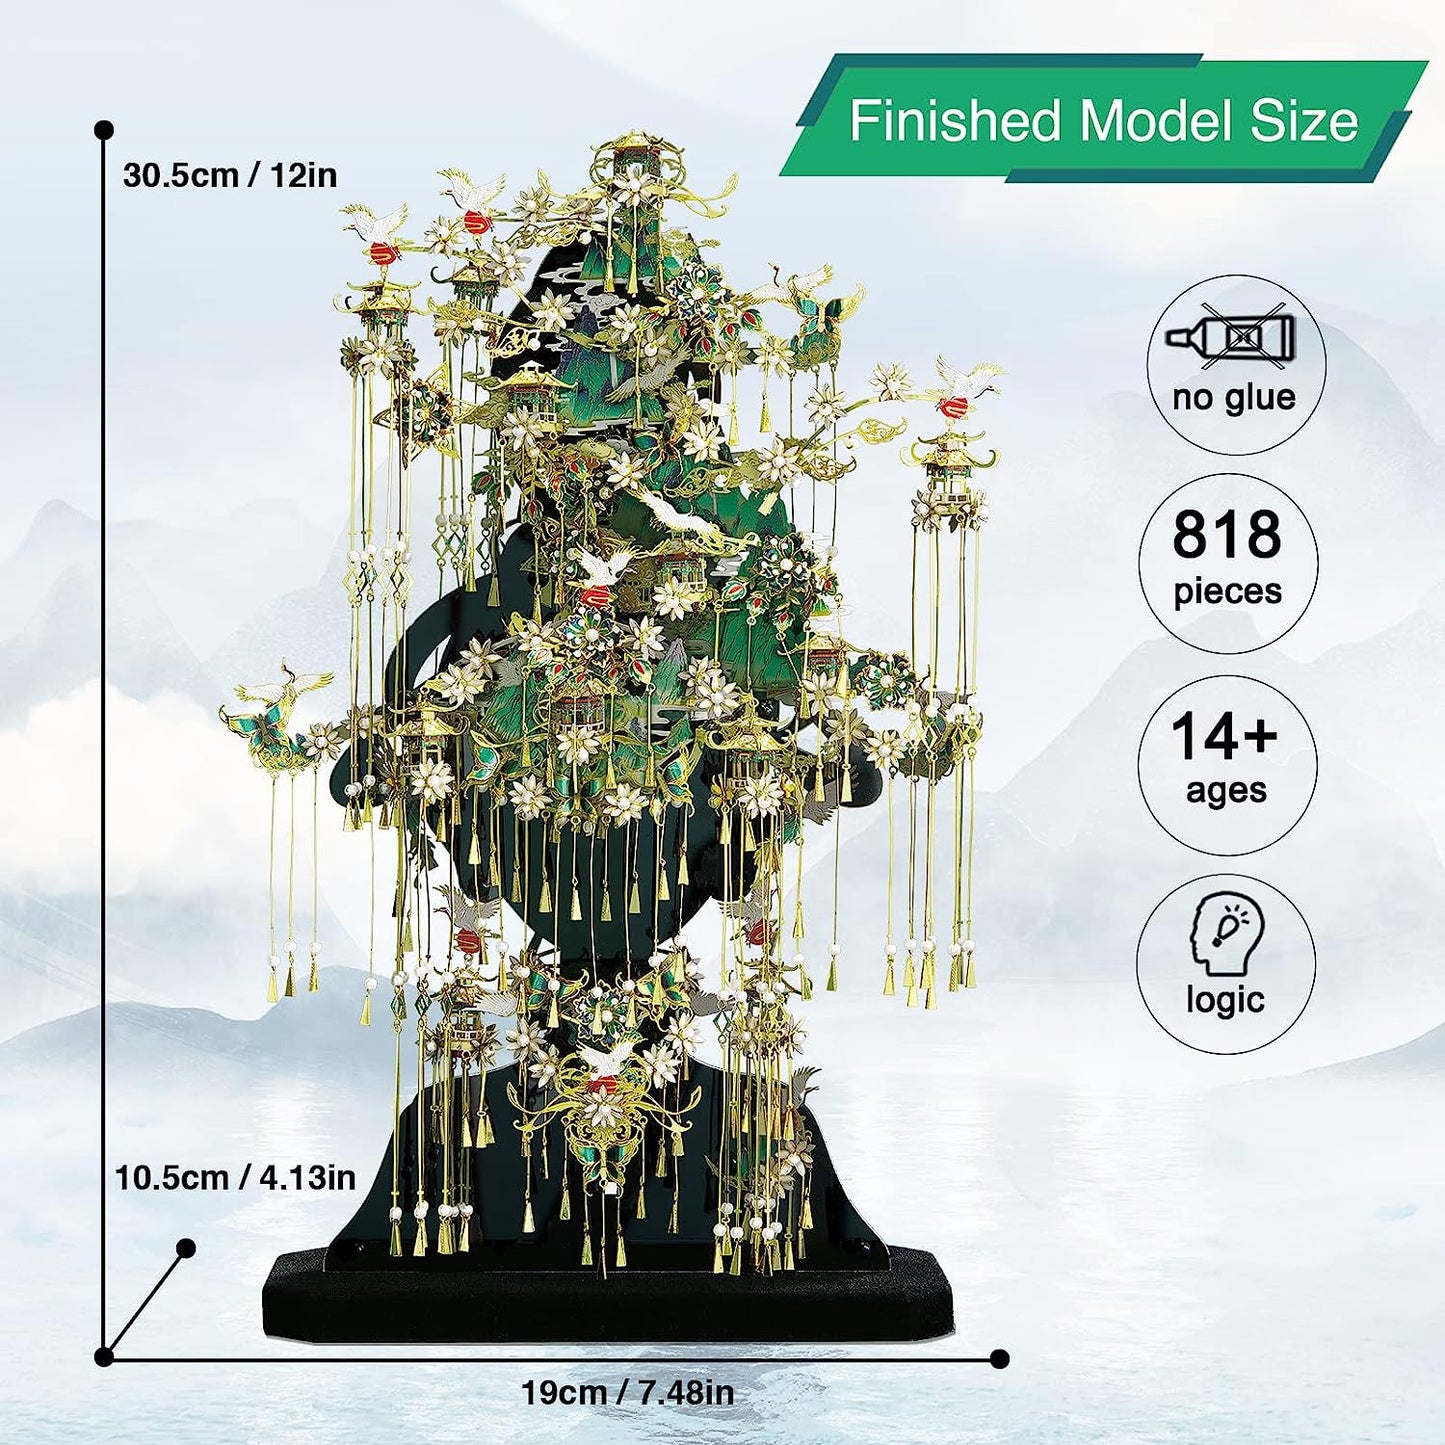 Piececool 3D Metal Puzzles for Adults, Qing SHAN DAI - Chinese Traditional Model Building Kits, Best Christmas Gifts, 818pcs